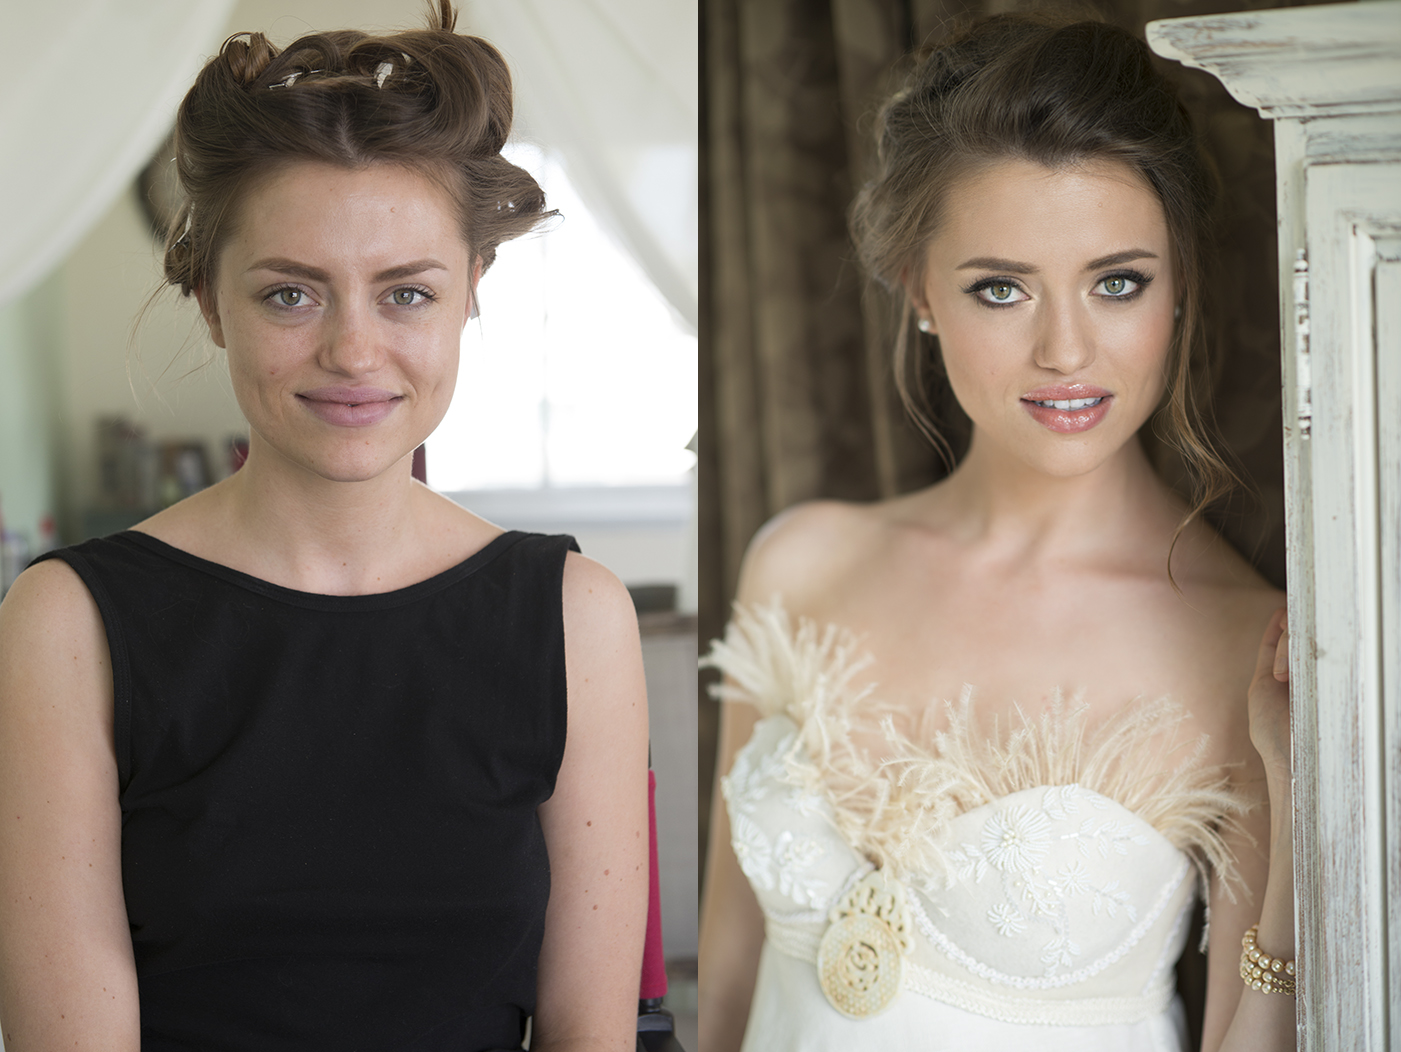 Bridal makeup trial  by Beauty Affair Agne asian beauty bride to be flawless updo romantic .jpg